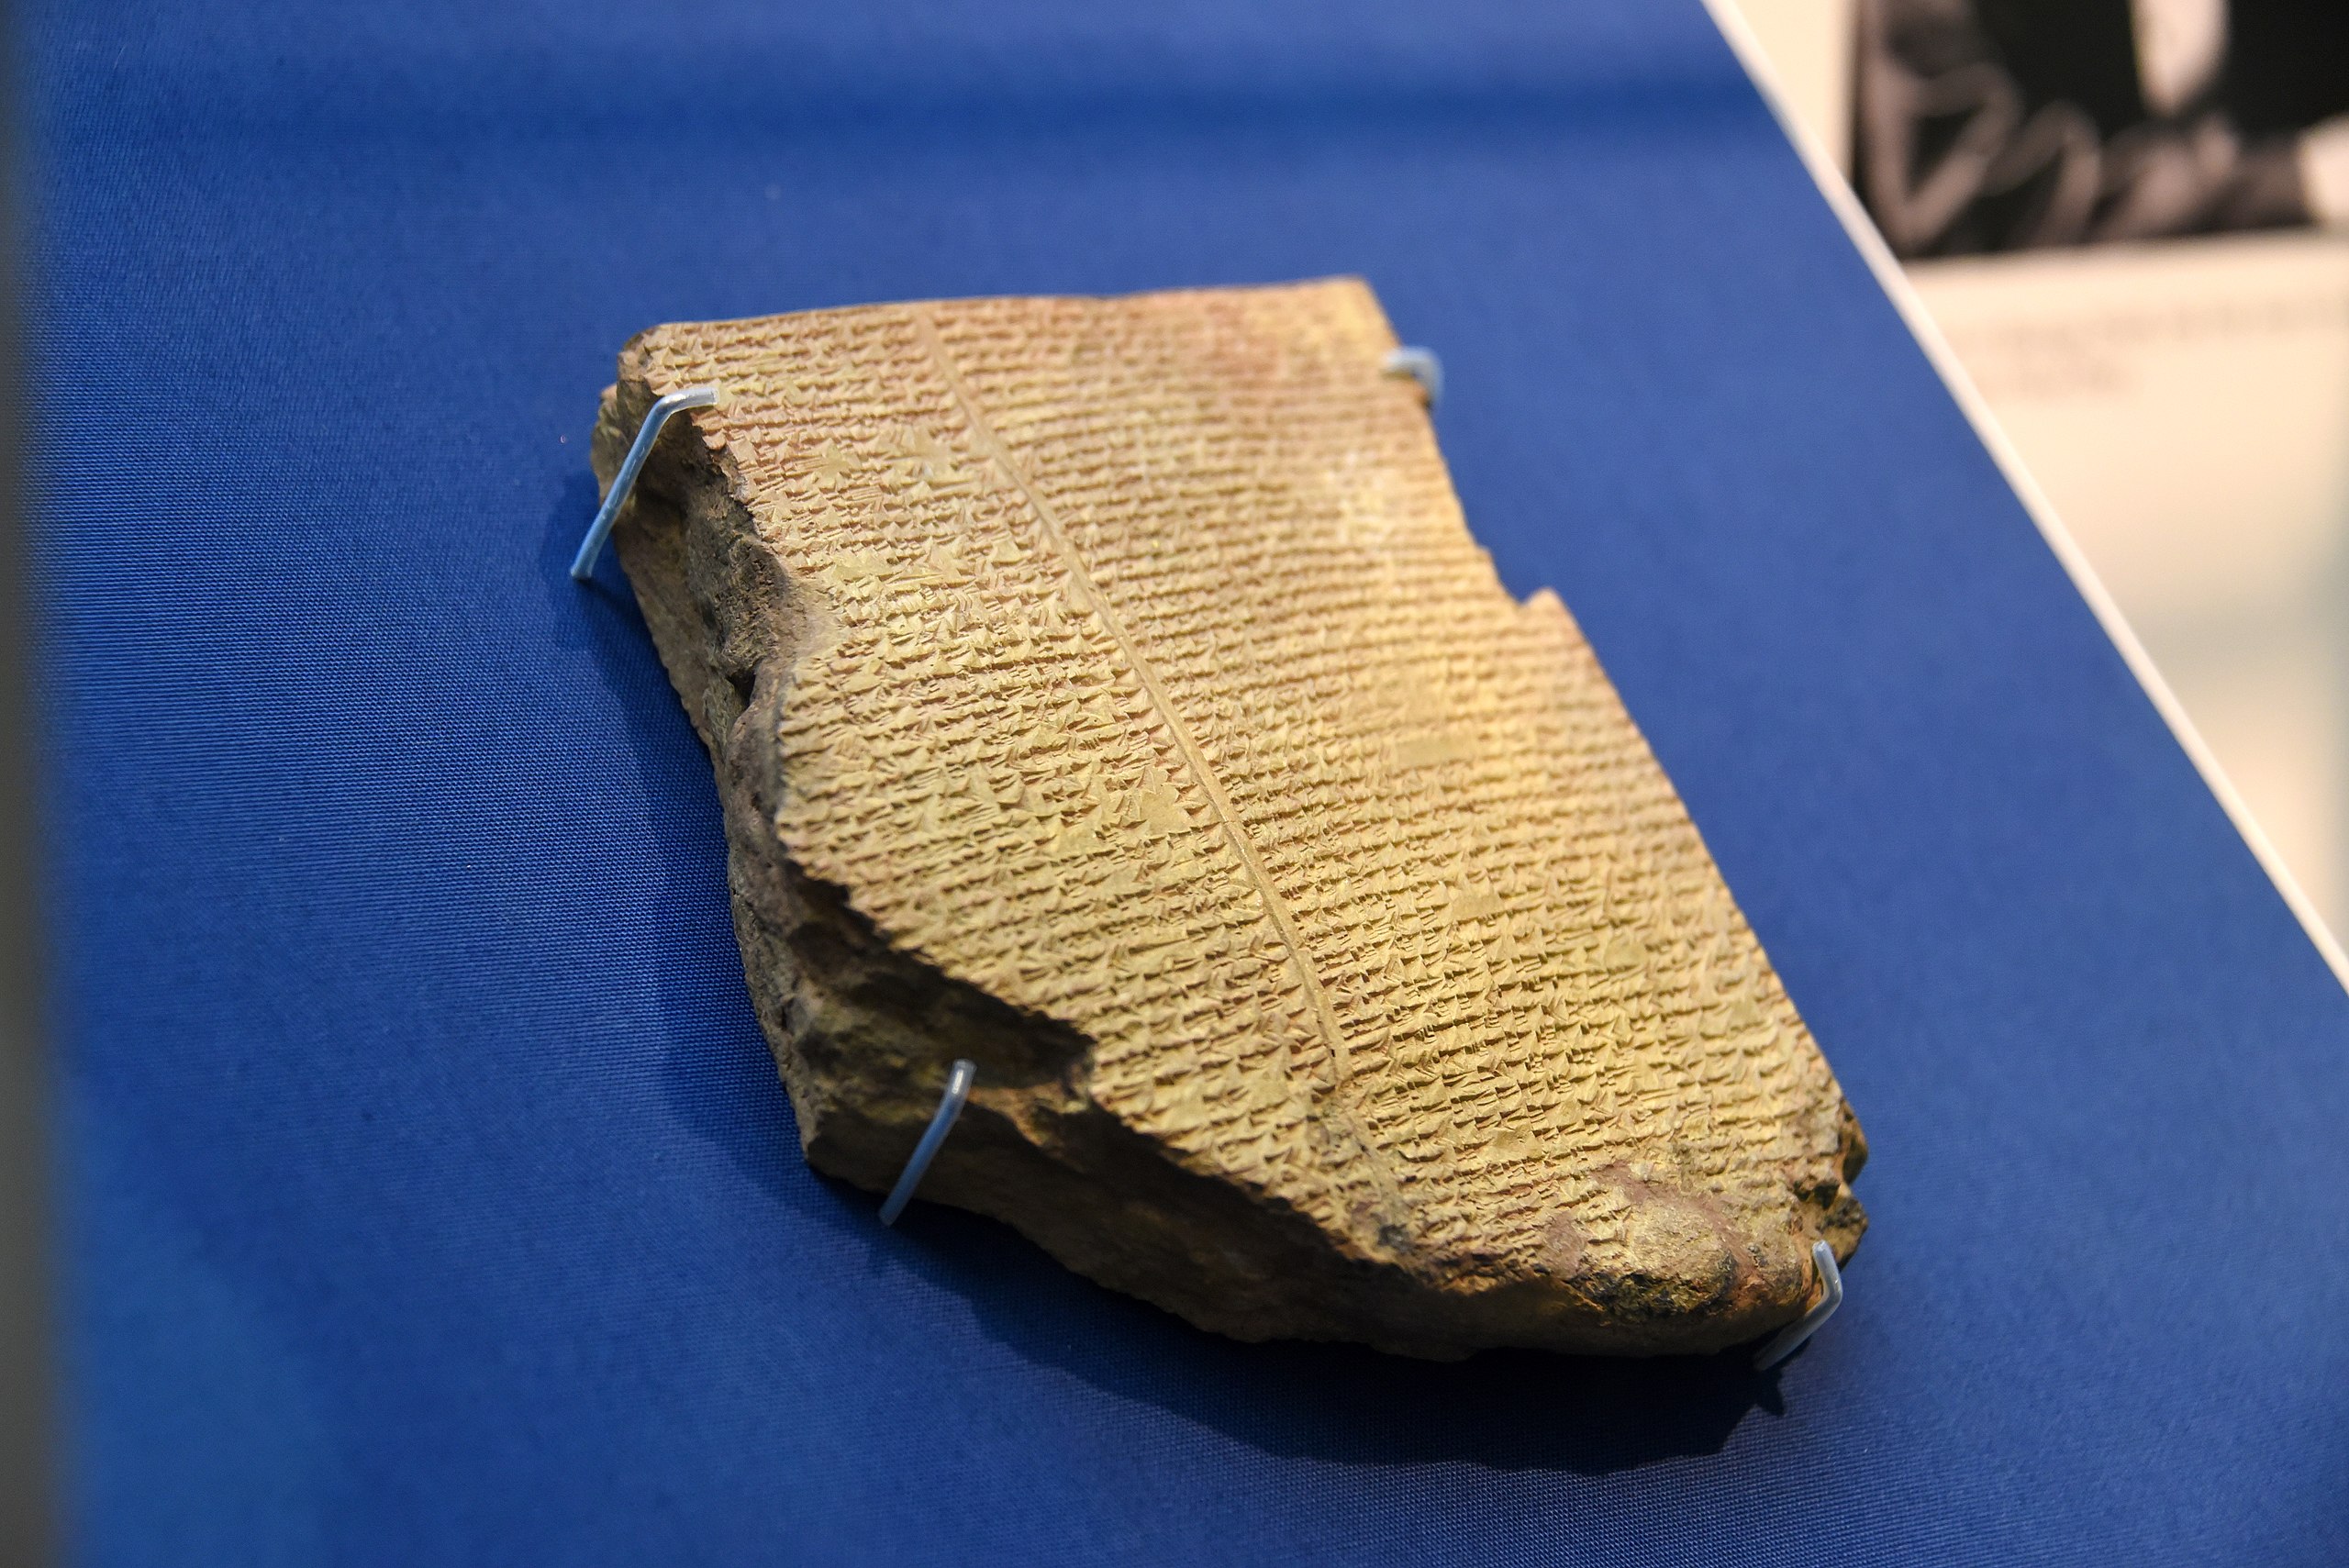 The tablet containing the flood story from the Epic of Gilgamesh.